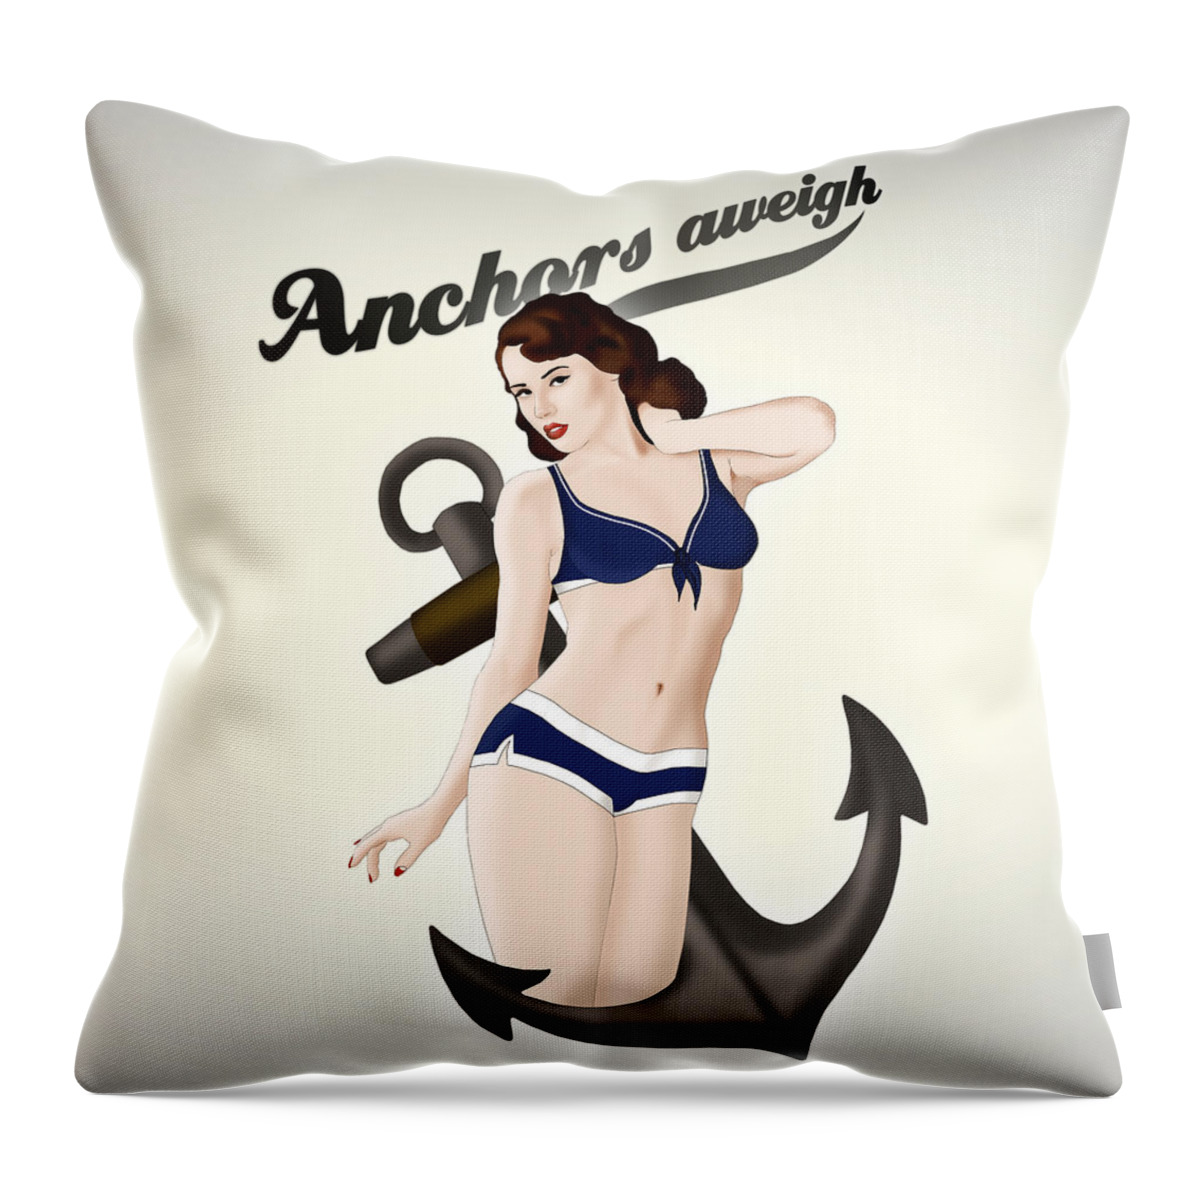 Pinup Throw Pillow featuring the drawing Anchors Aweigh - Classic Pin Up by Nicklas Gustafsson